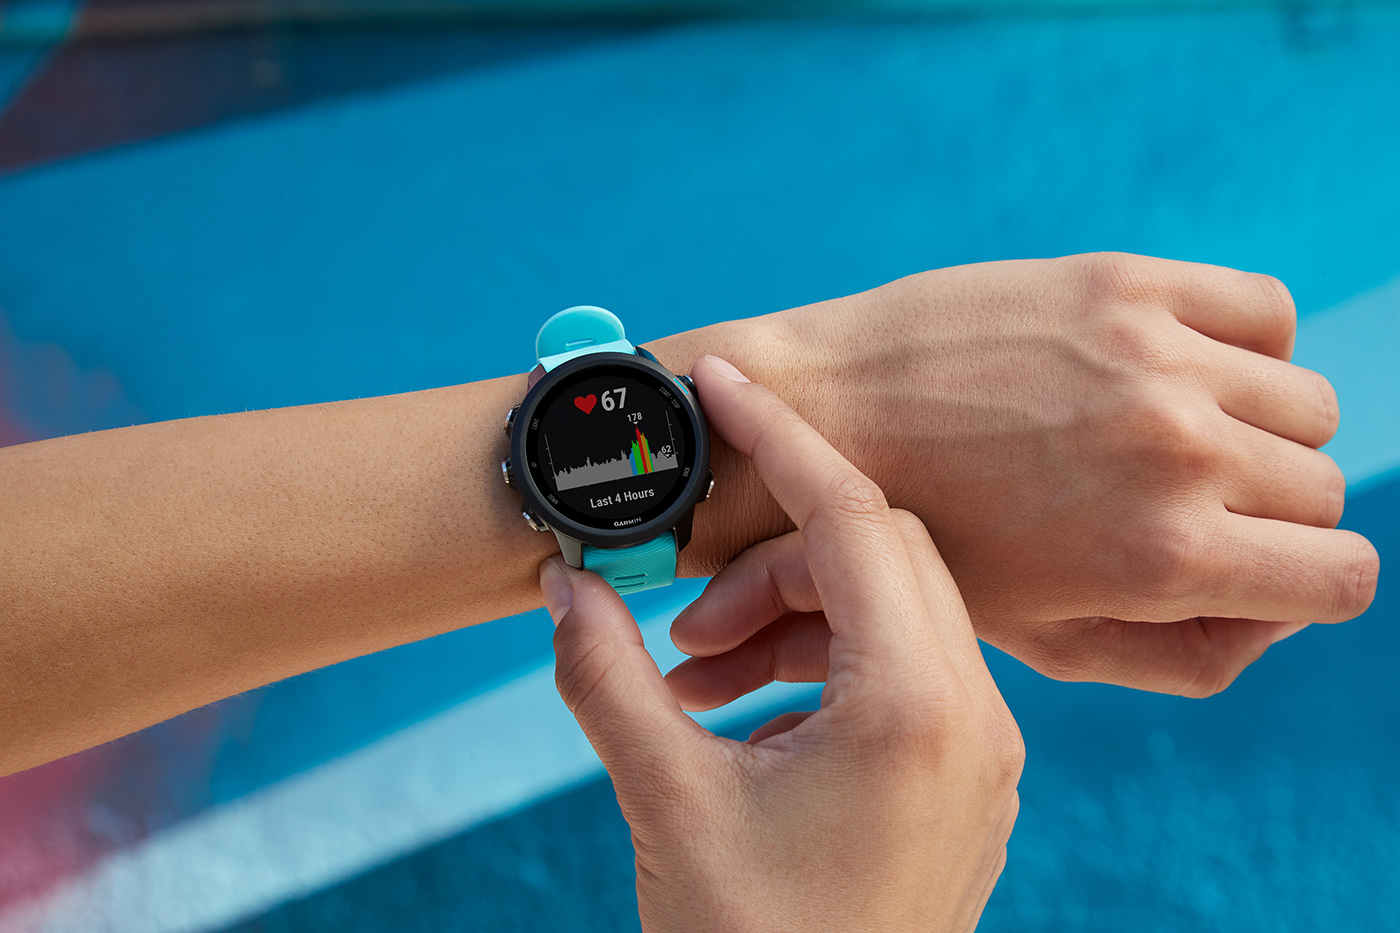 Garmin Smartwatches Measure Heart Rate Every Second